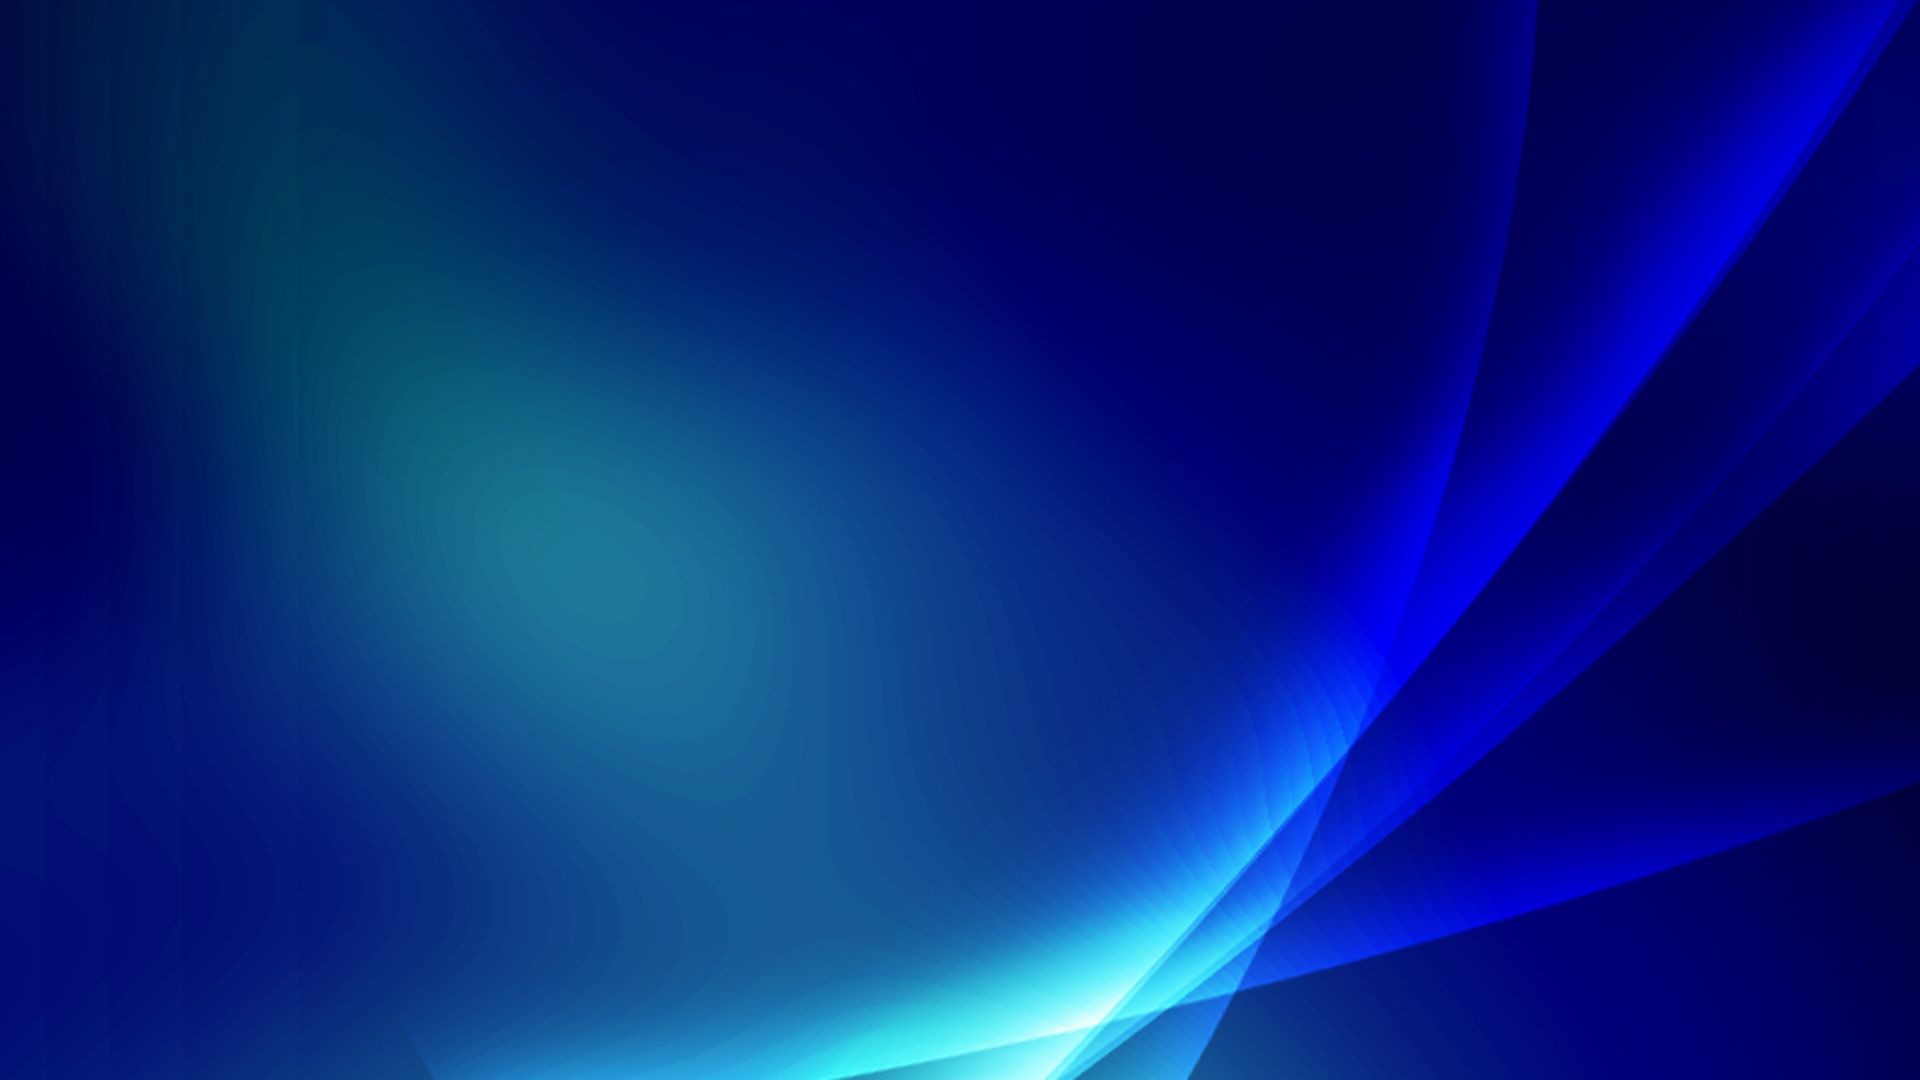 476840 widescreen royal blue backgrounds 1920x1080 free download